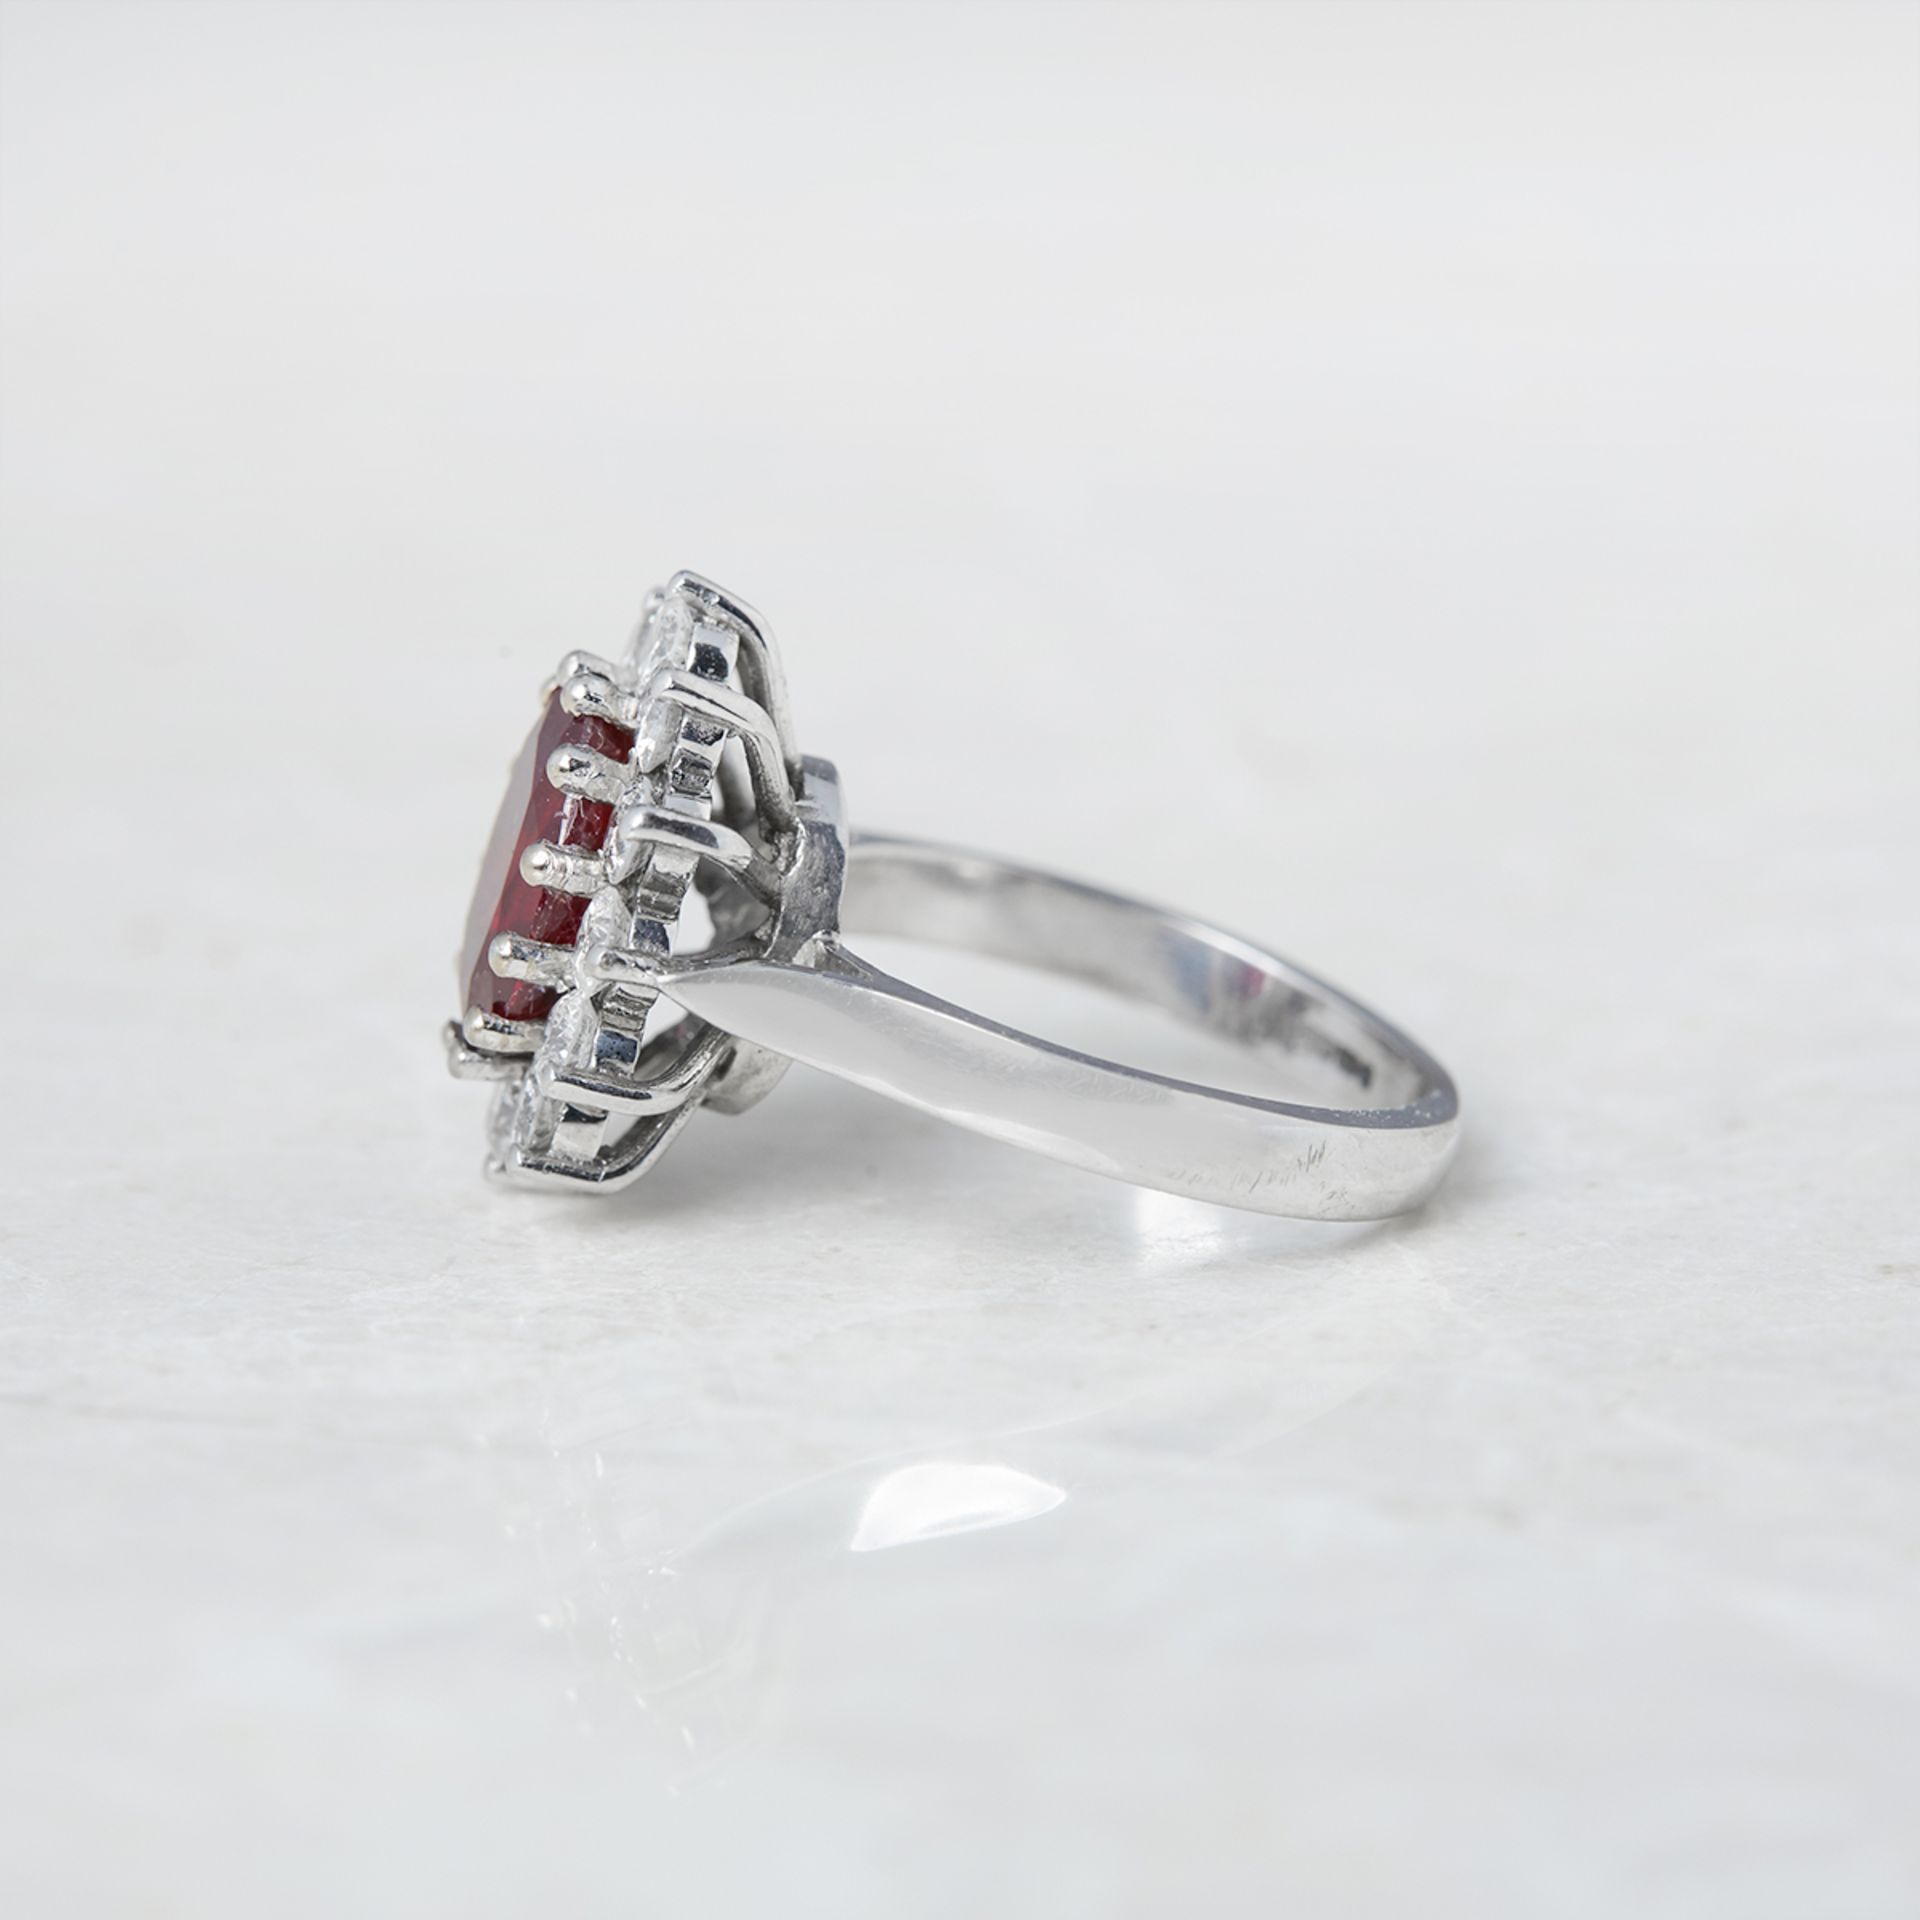 Unbranded 18k White Gold 2.50ct Ruby & 1.00ct Diamond Cocktail Ring - Image 3 of 5